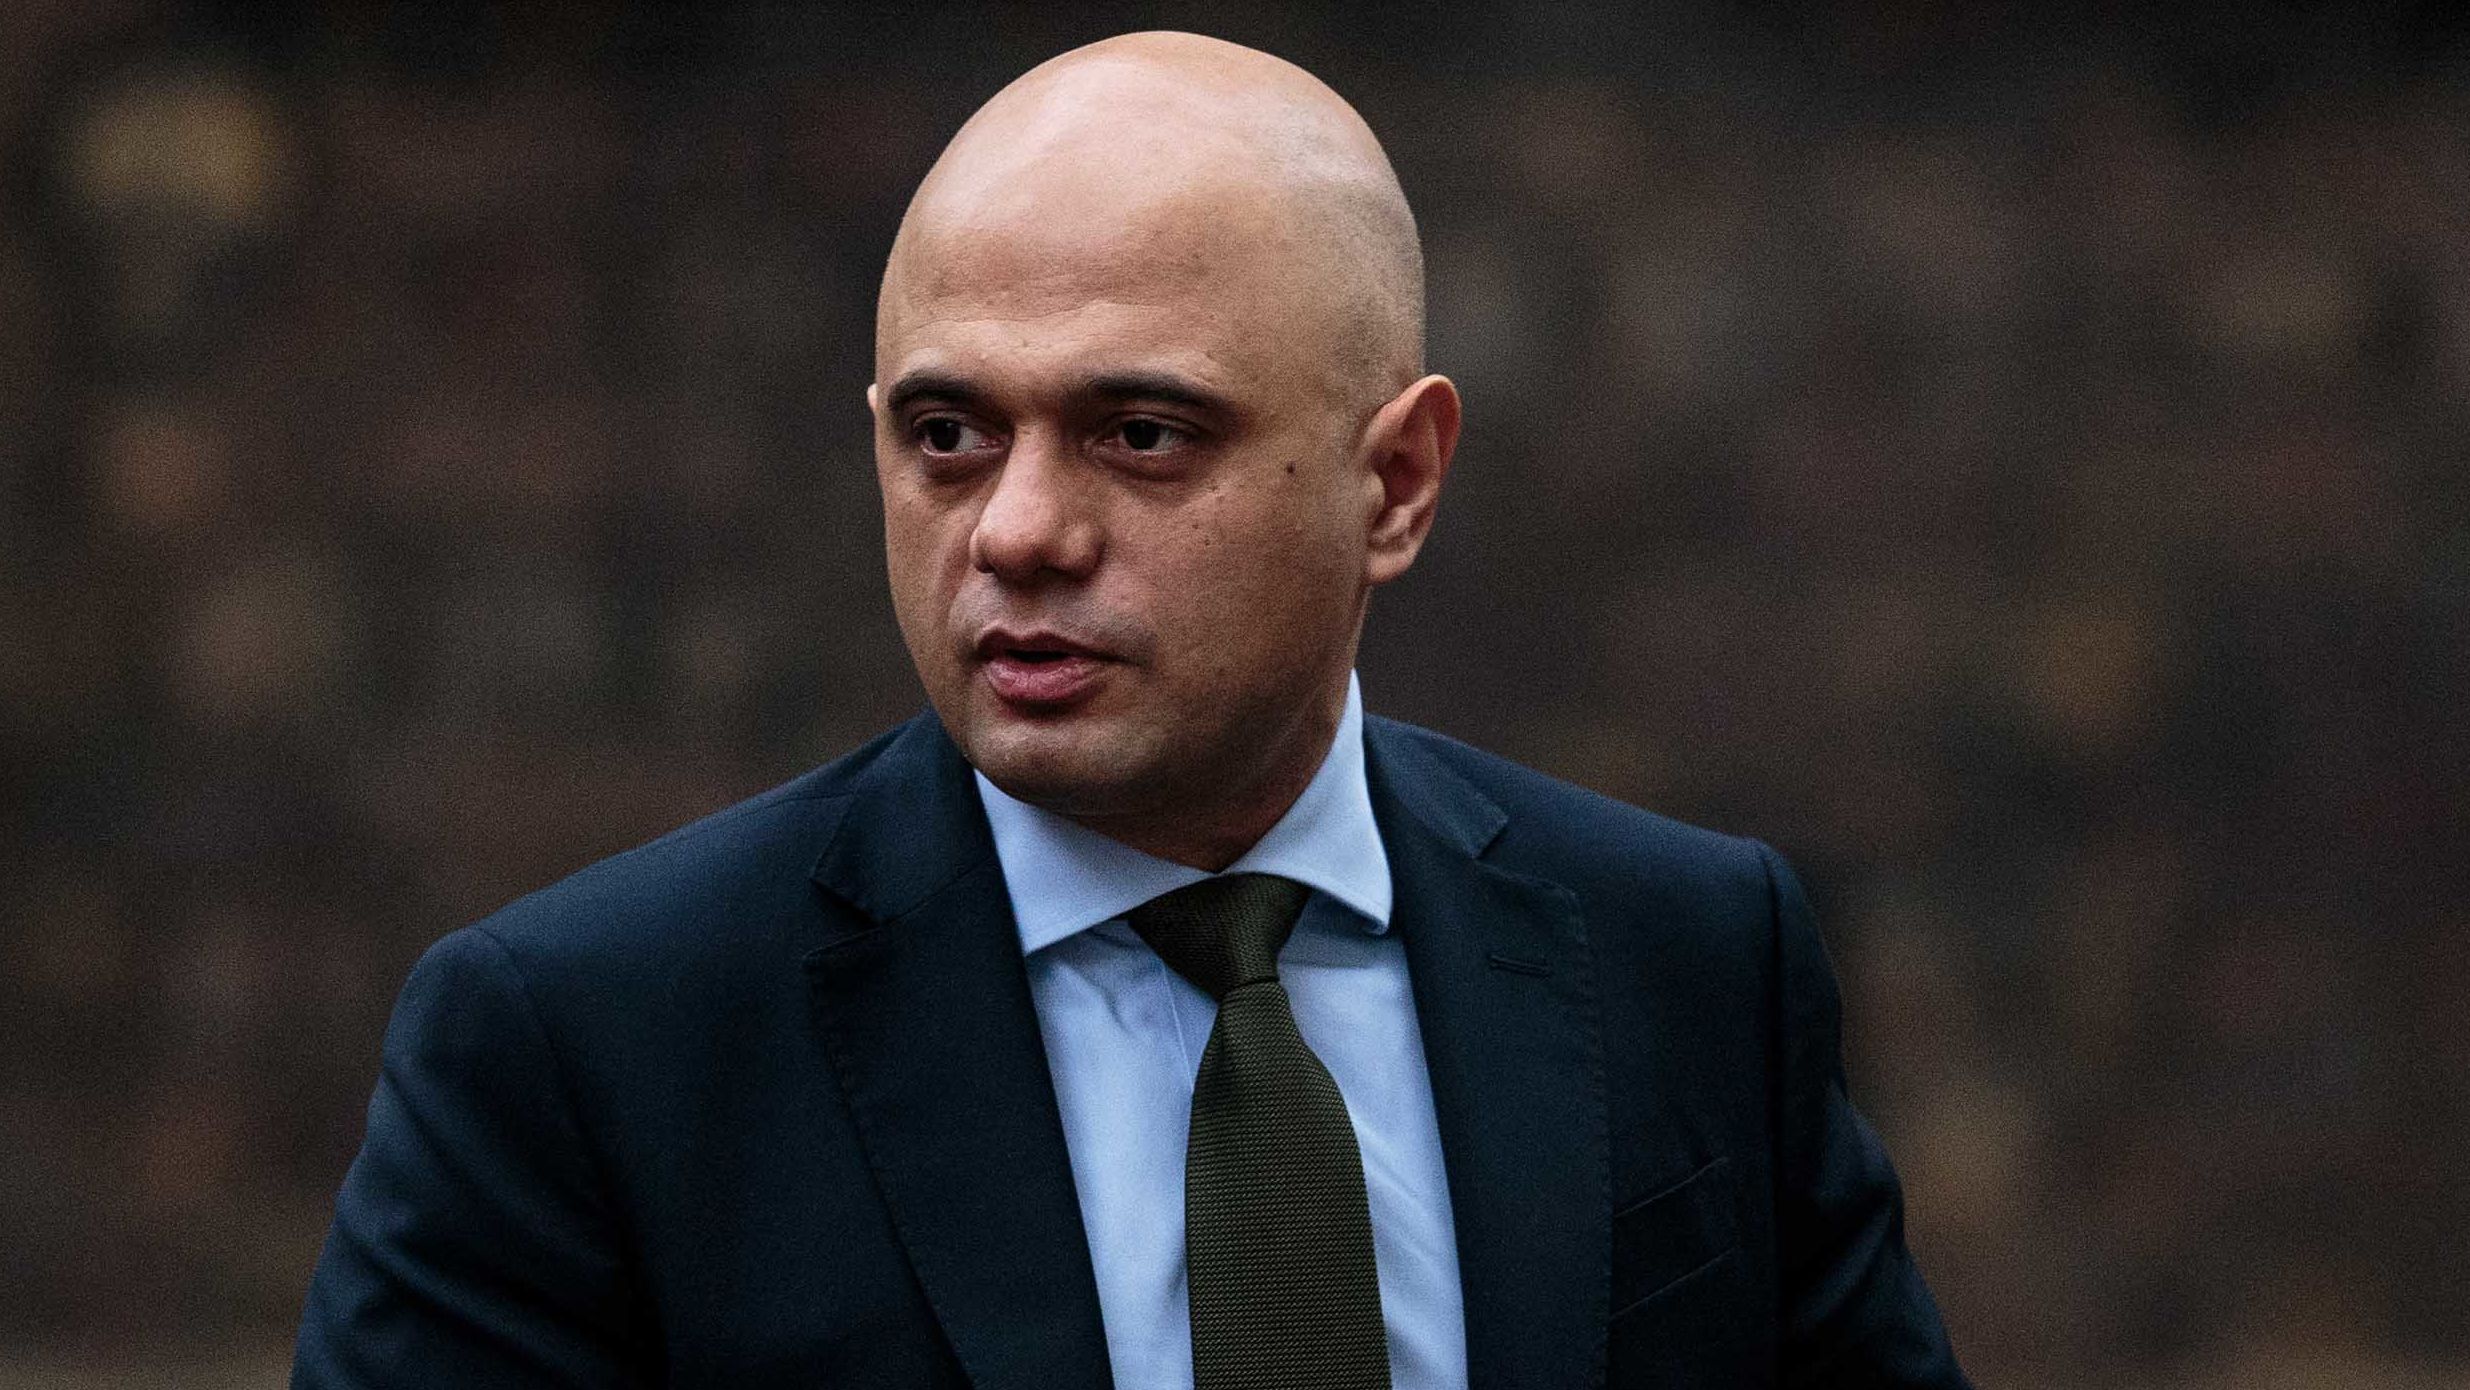 UK Home Secretary Sajid Javid said he was introducing the new powers to "stop gang members carrying knives in the first place."